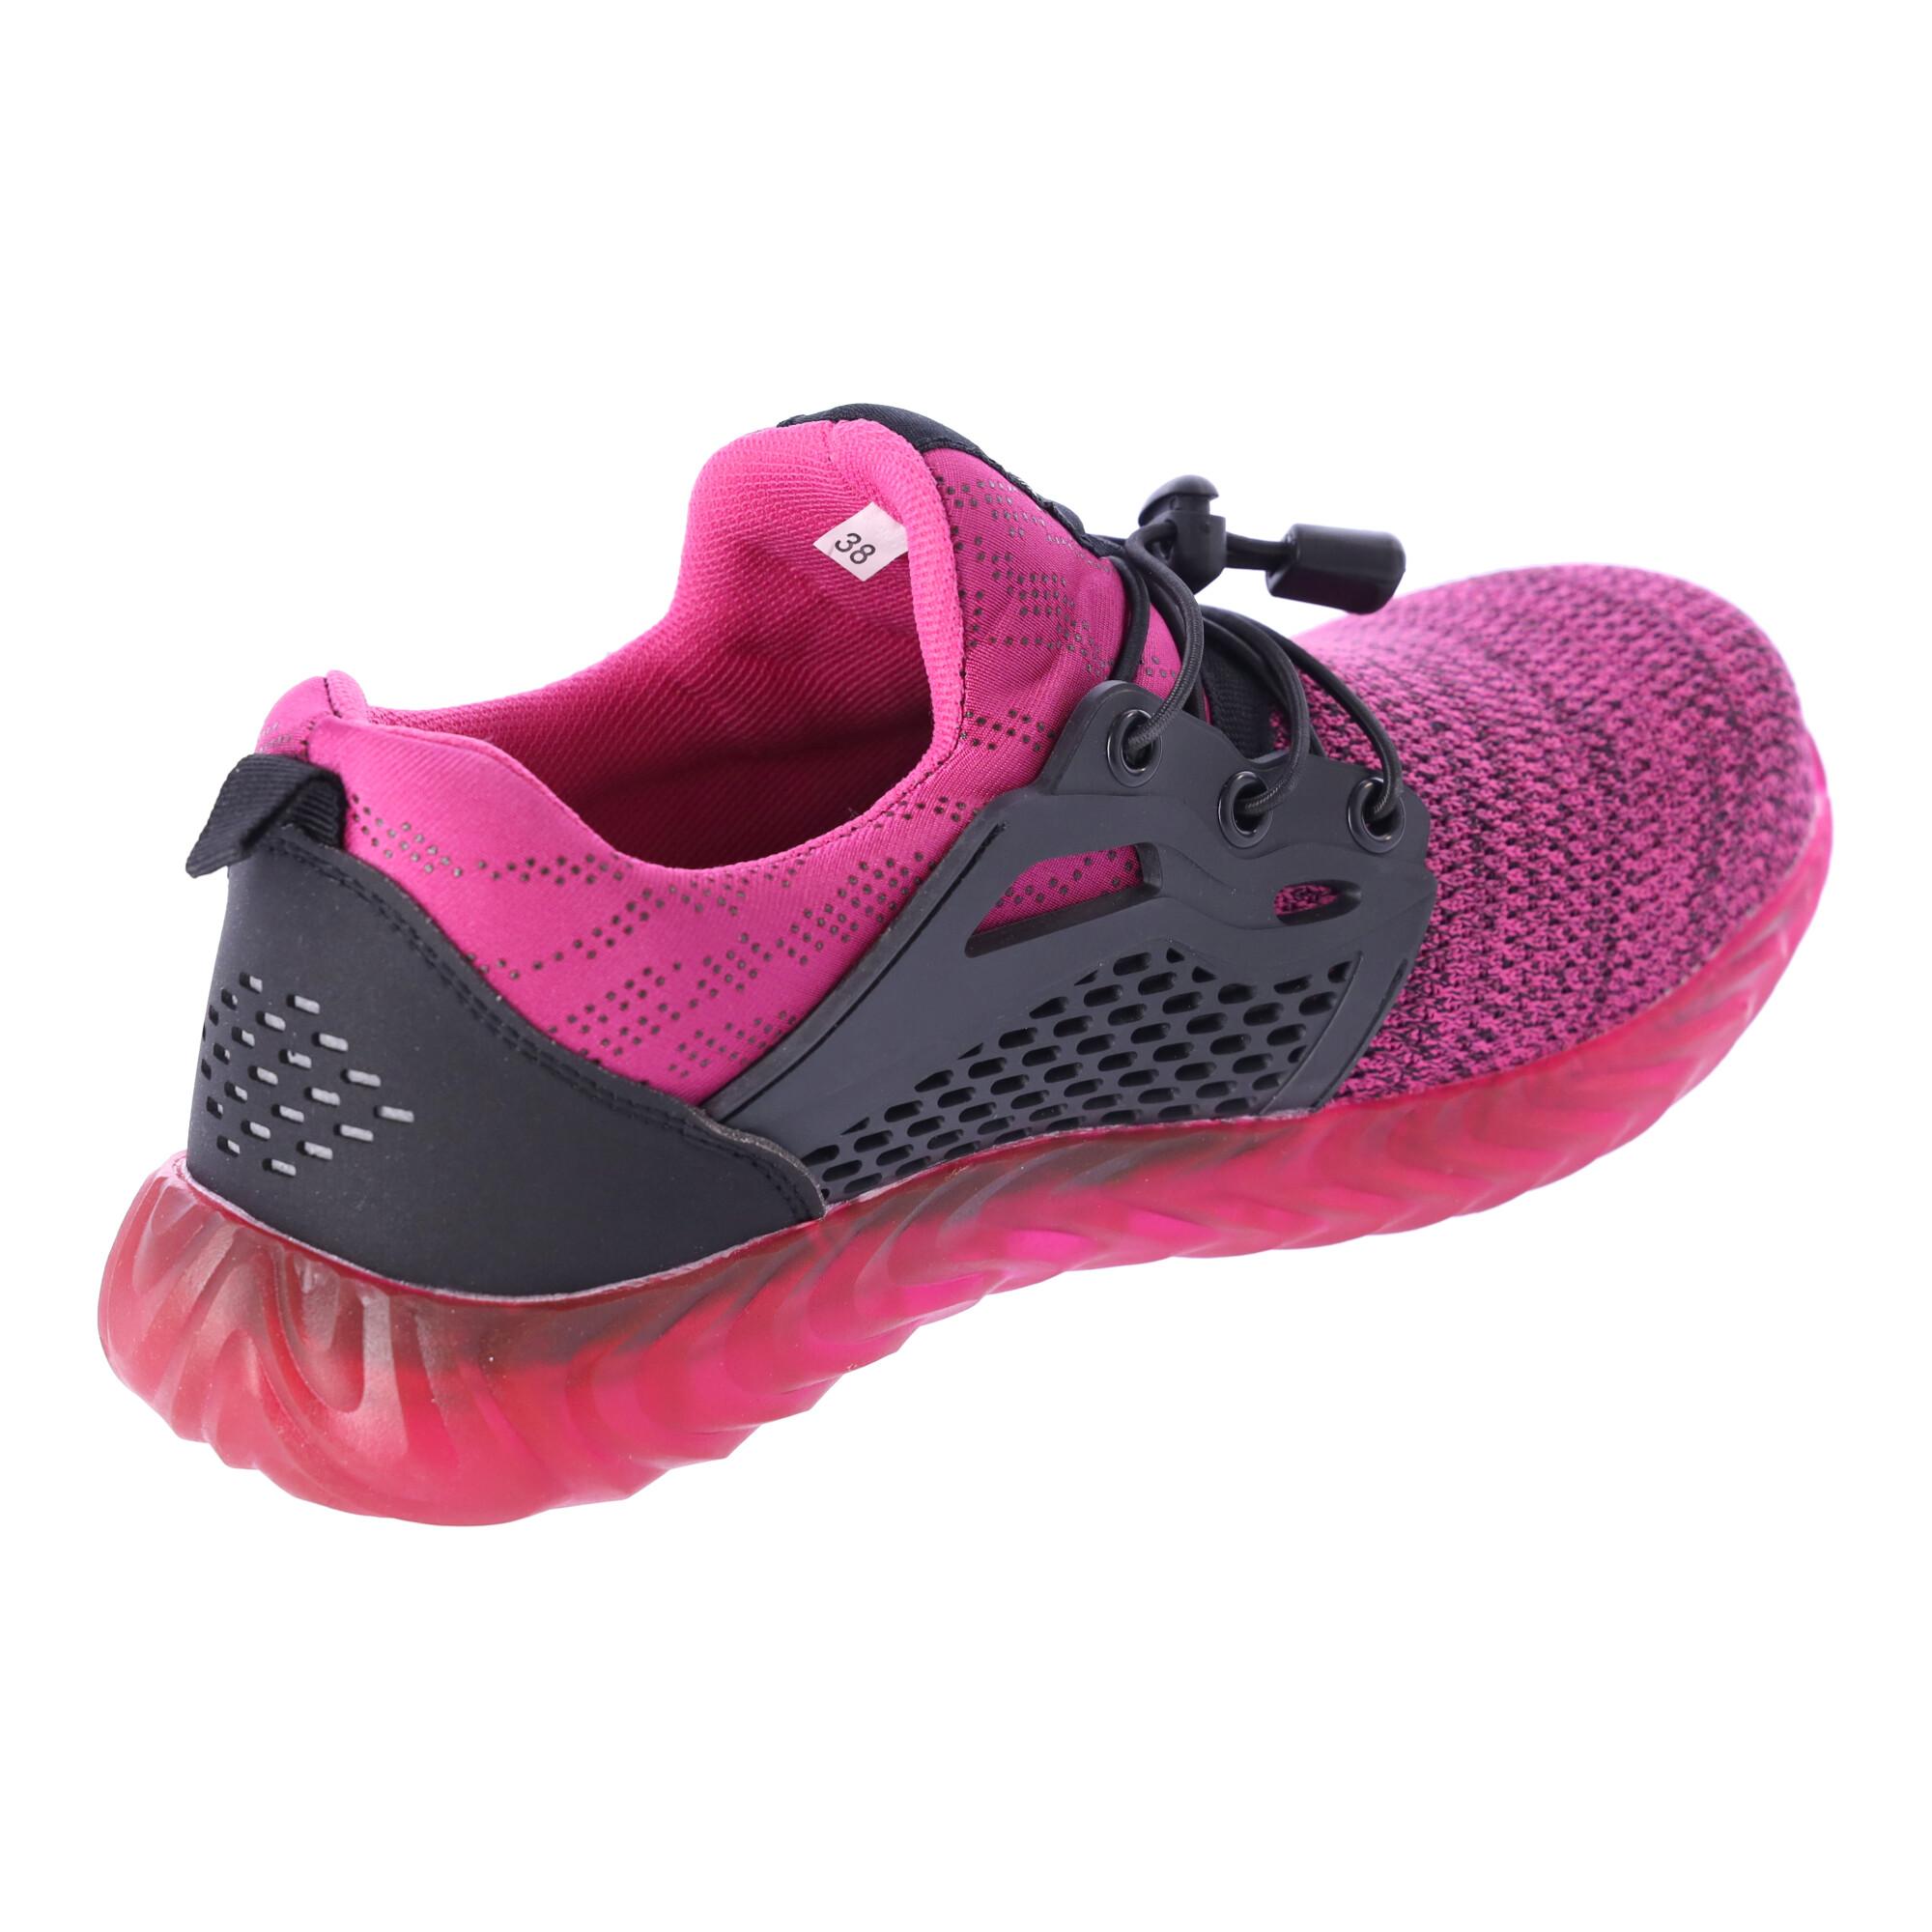 Work safety shoes "41" - pink